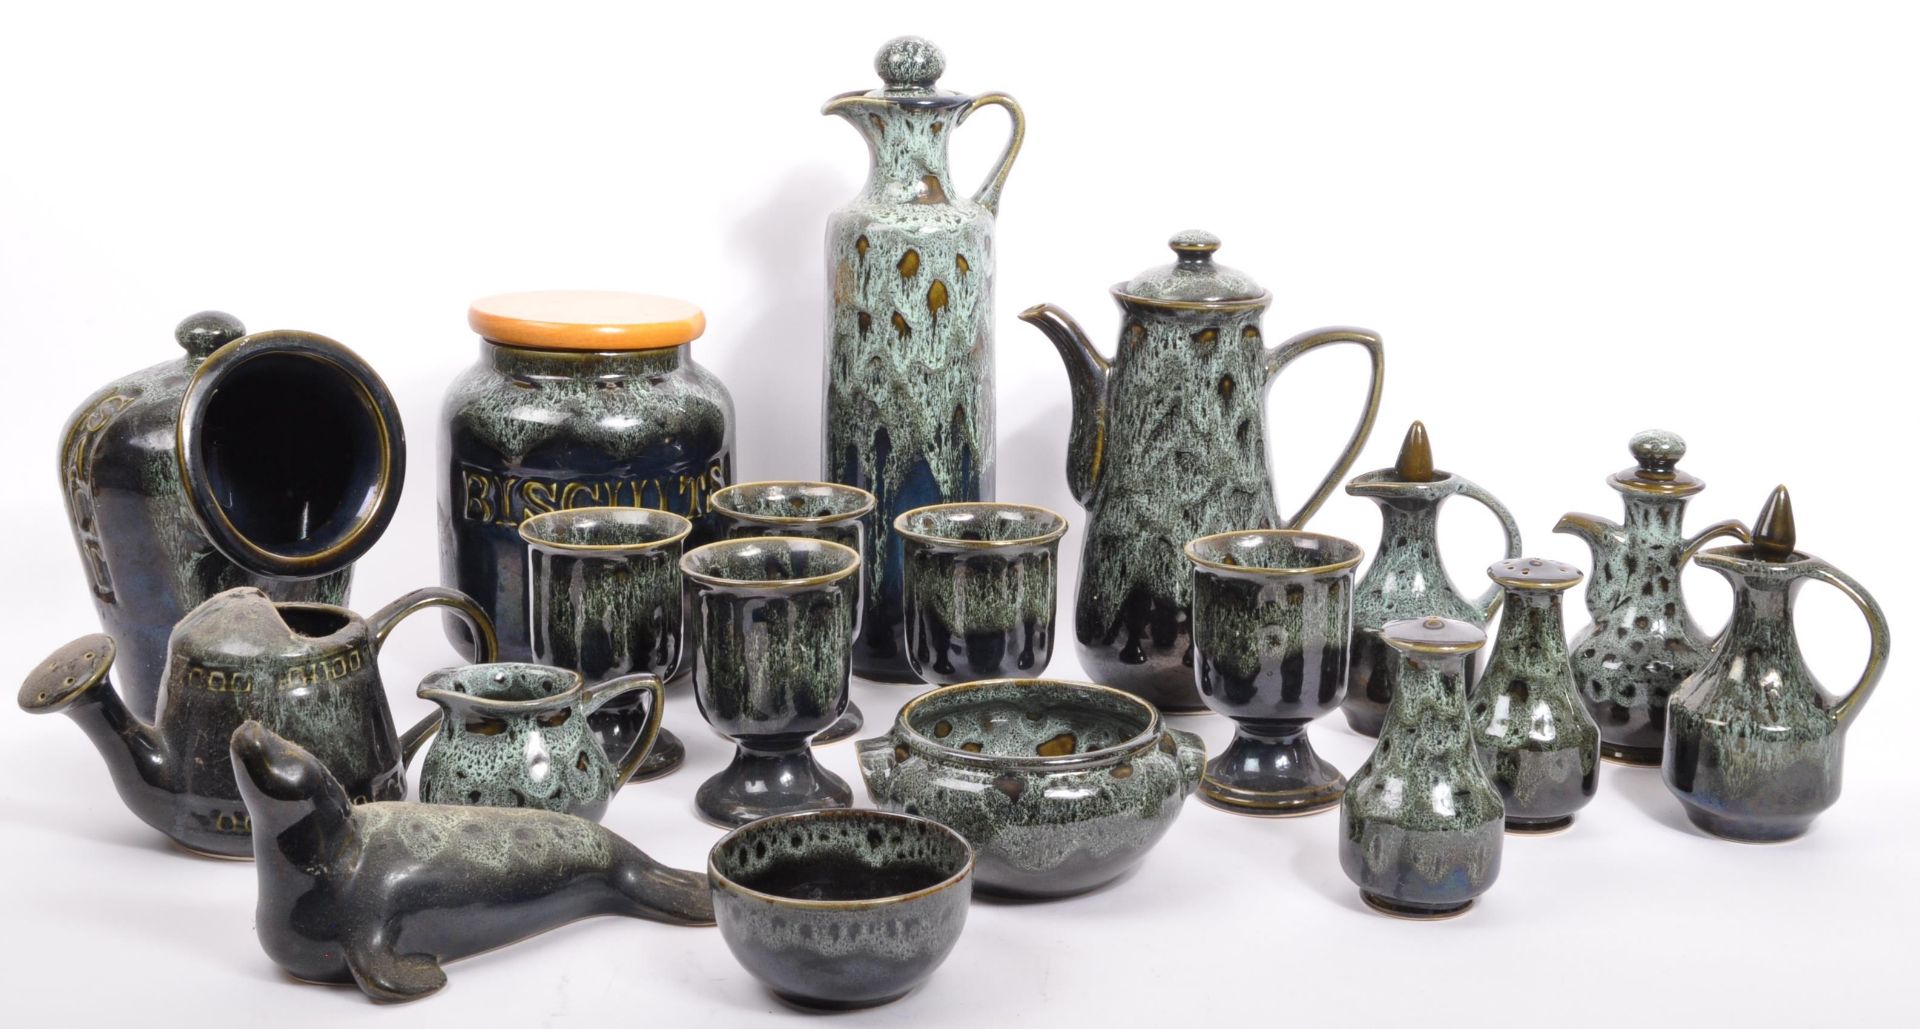 A LARGE COLLECTION OF FOSTERS STUDIO POTTERY / TEA SERVICE